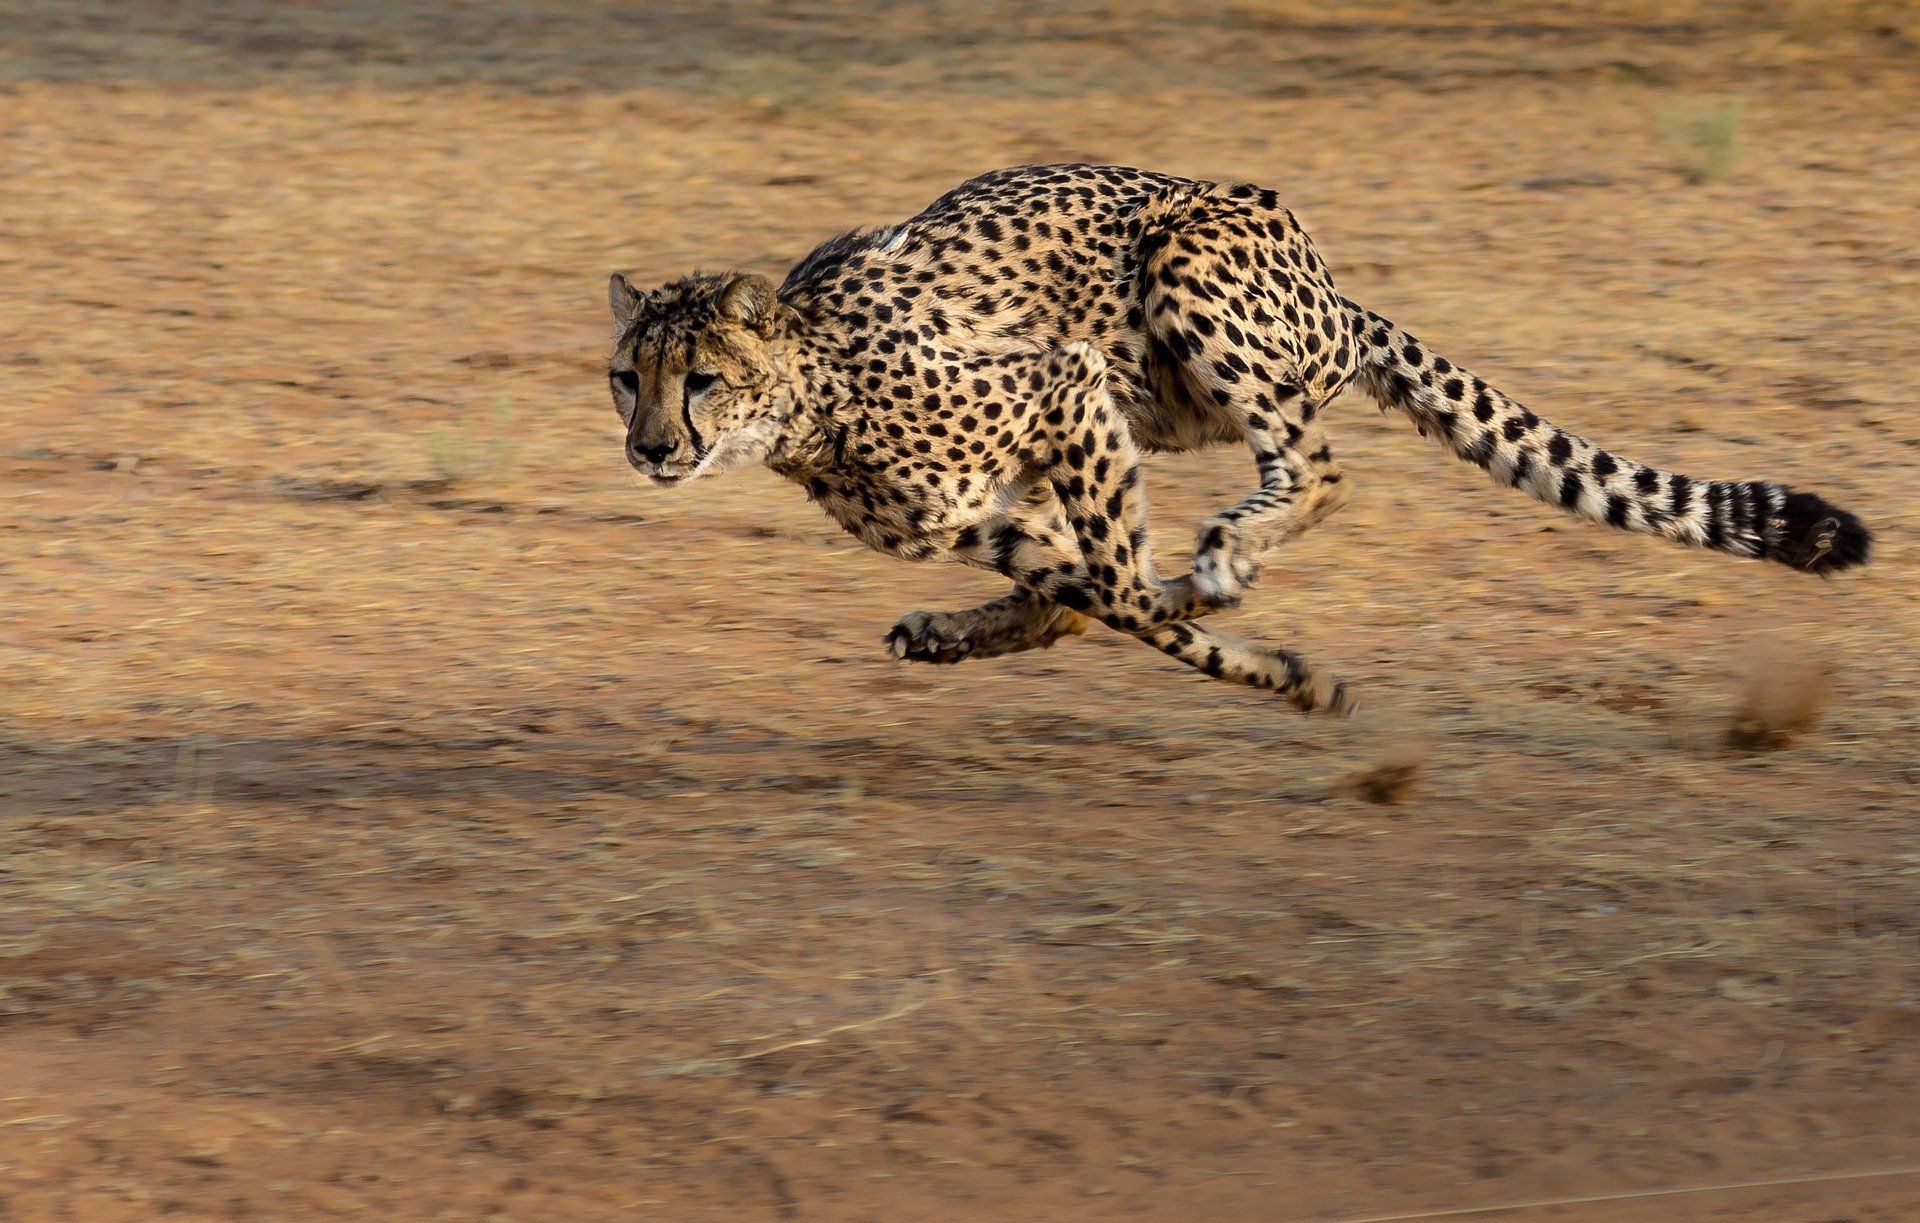 Amazon Quiz: In 2012, Sarah- a member of this species, completed a distance of 100 metres in how many seconds?